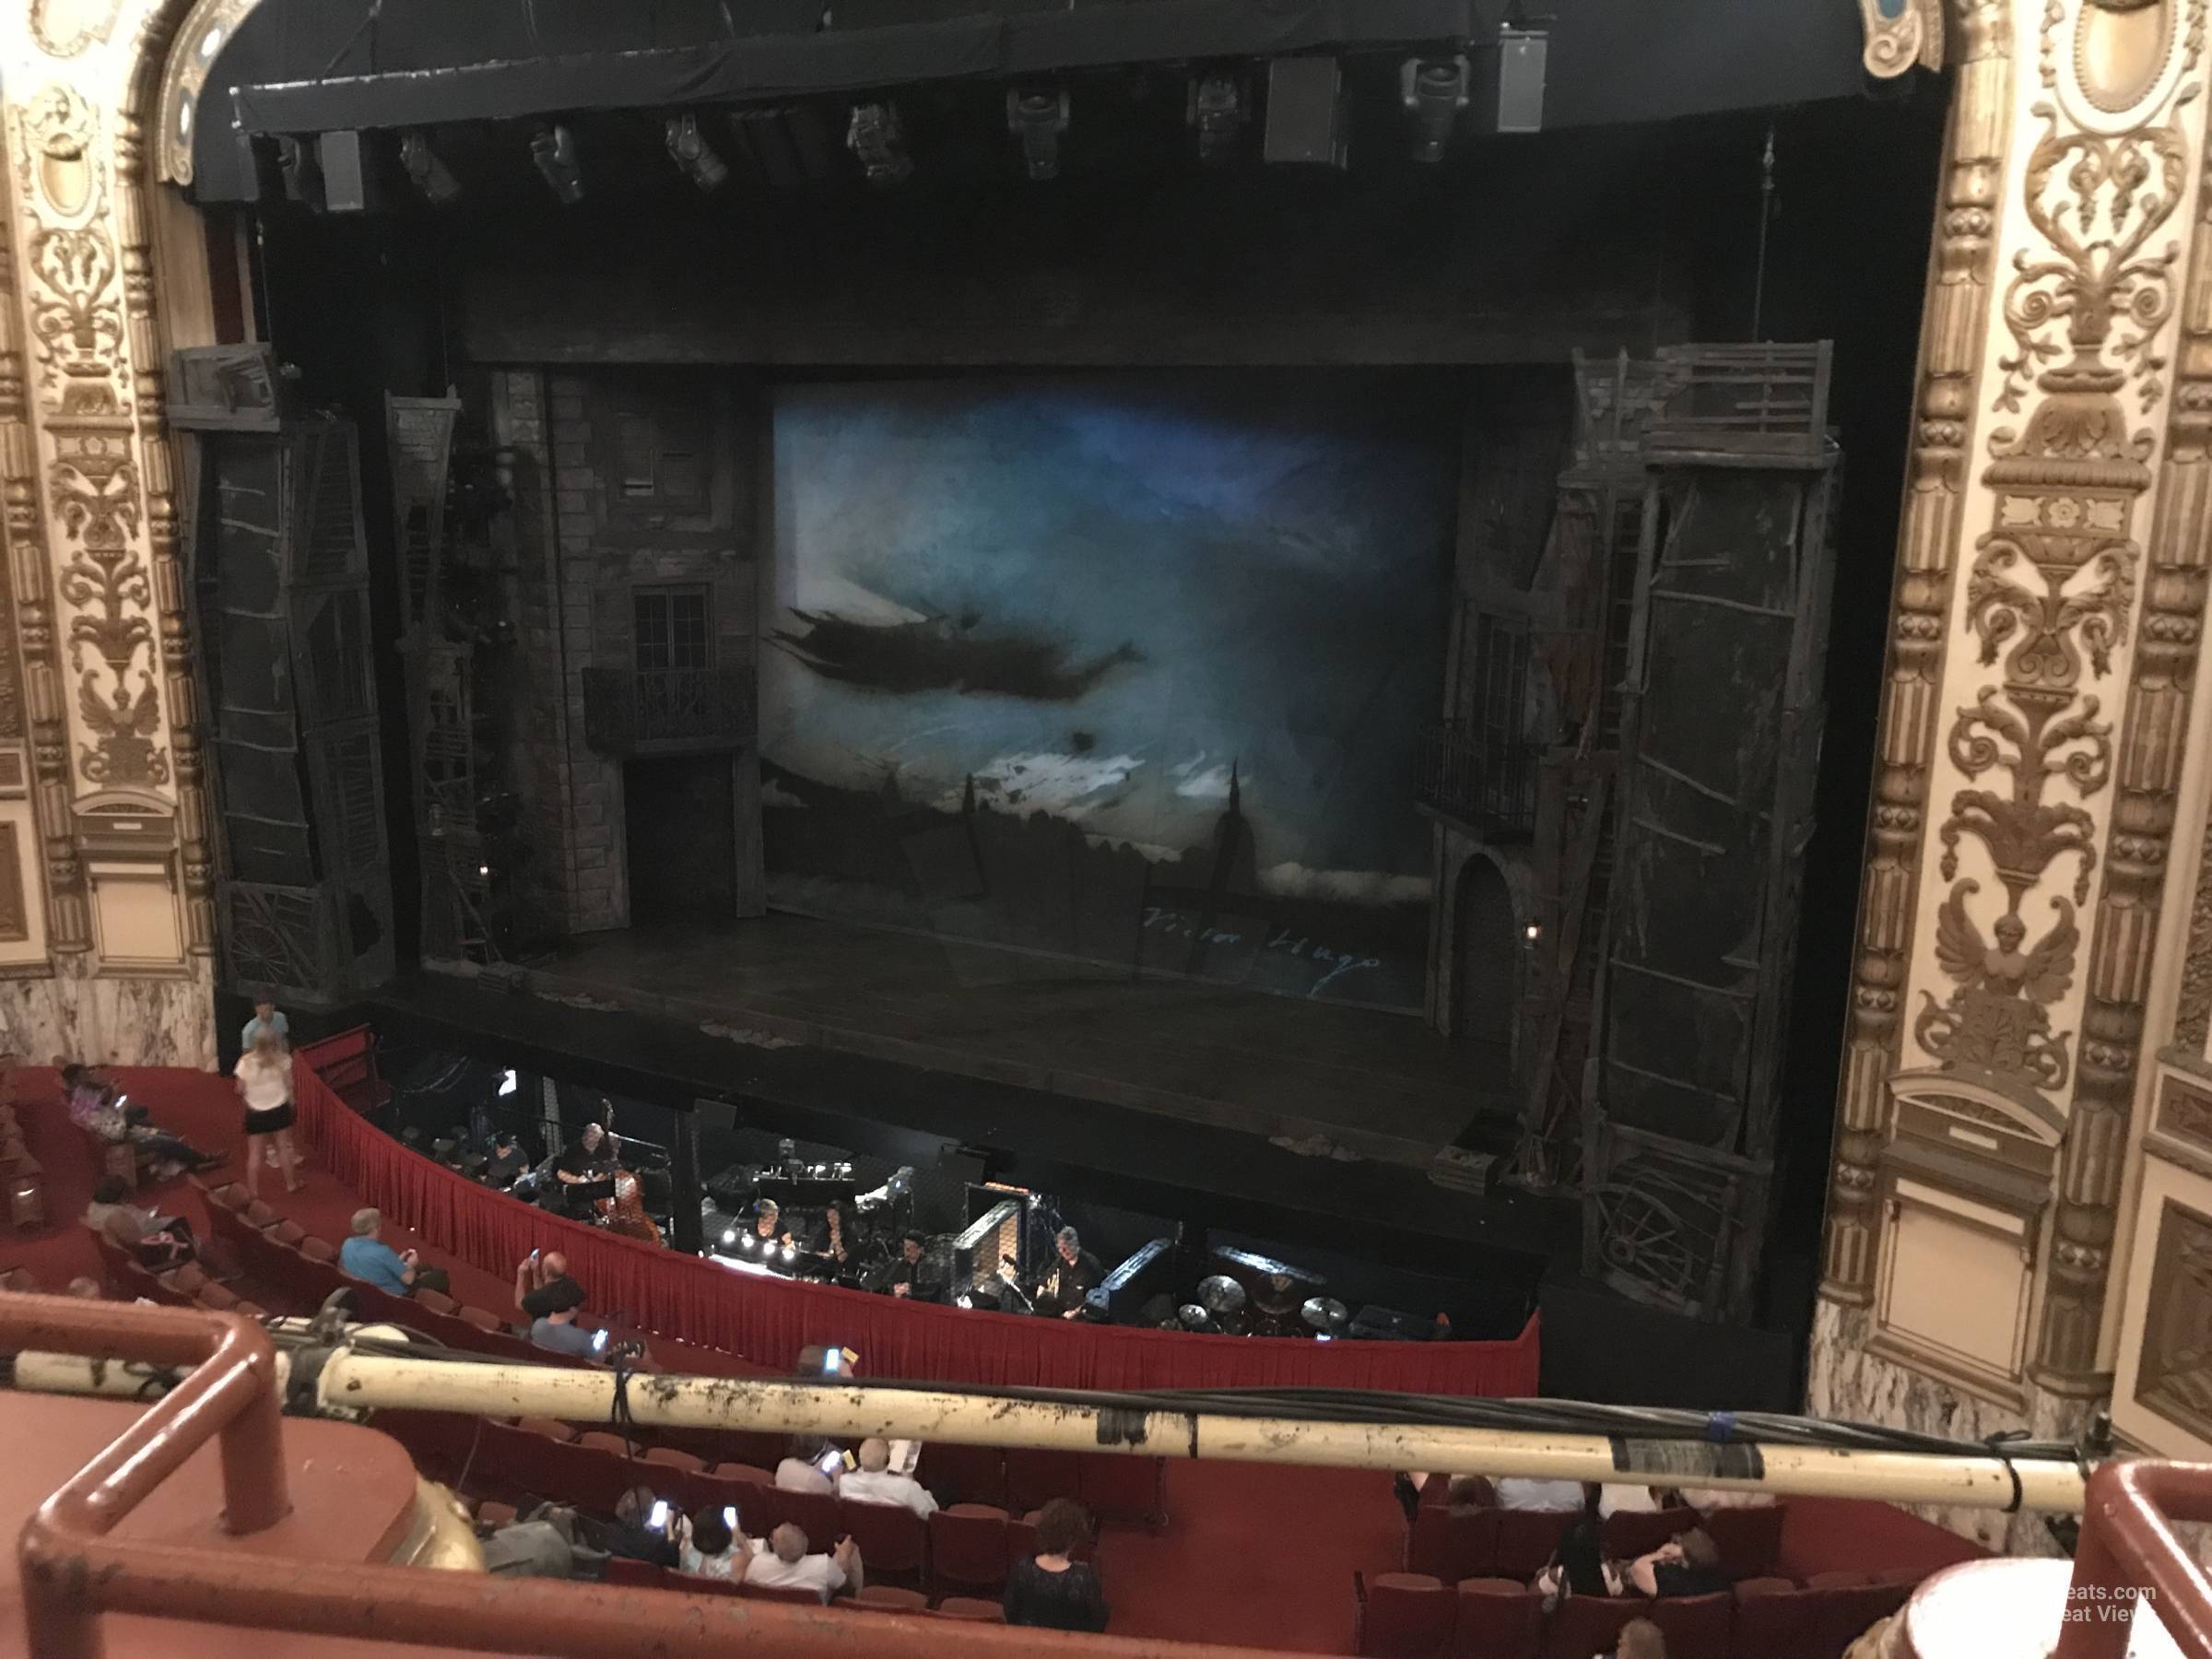 loge right seat view  - cadillac palace theatre